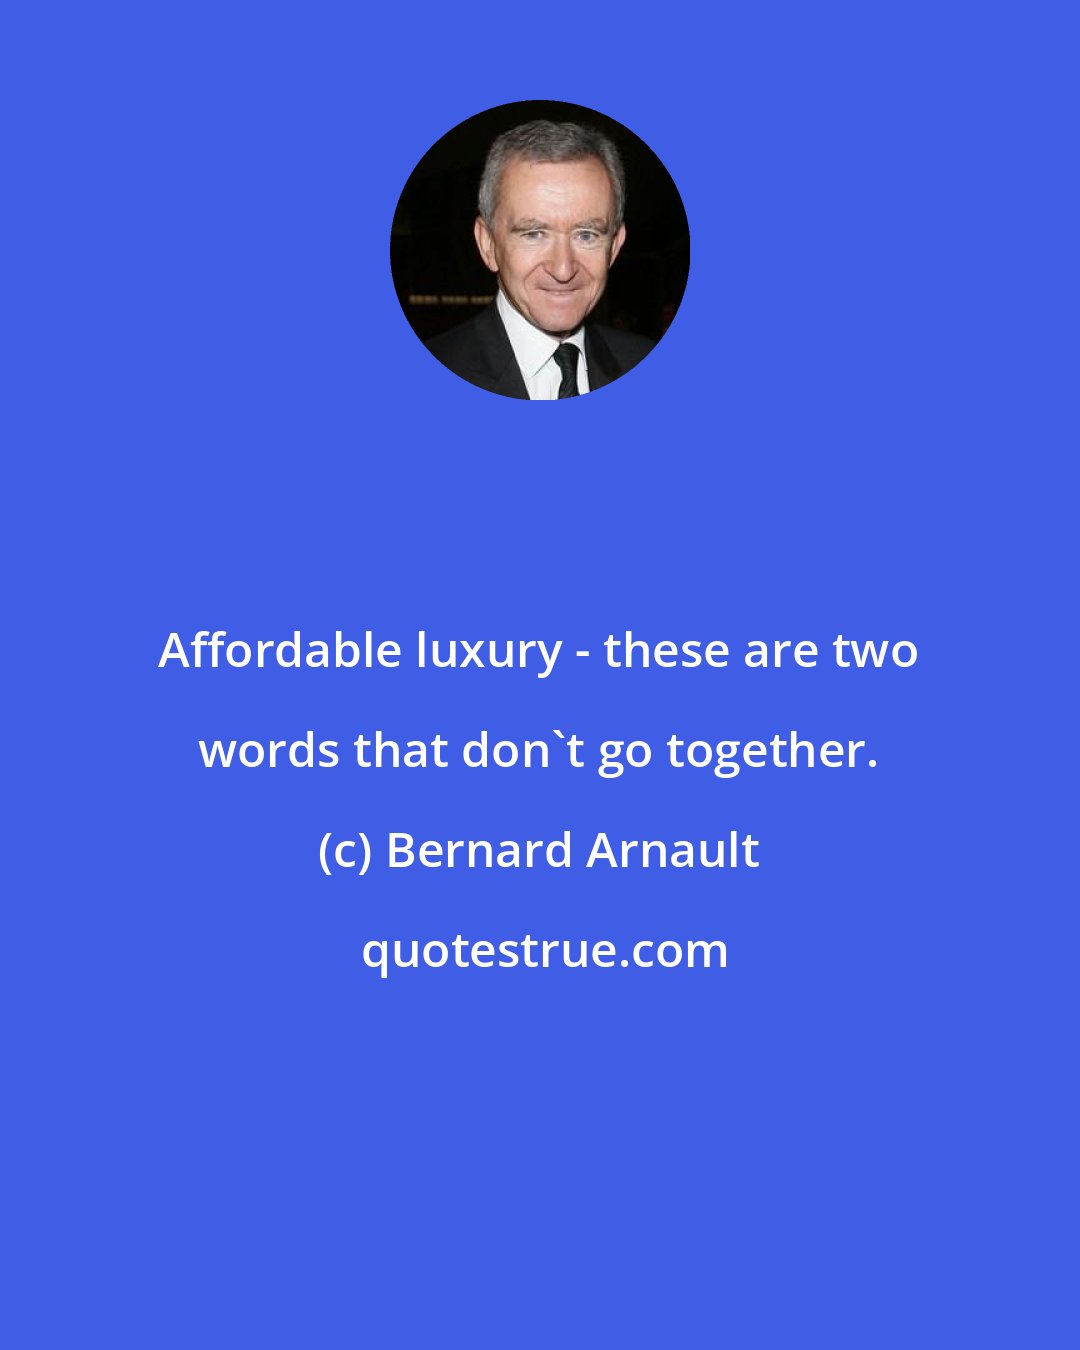 Bernard Arnault: Affordable luxury - these are two words that don't go together.